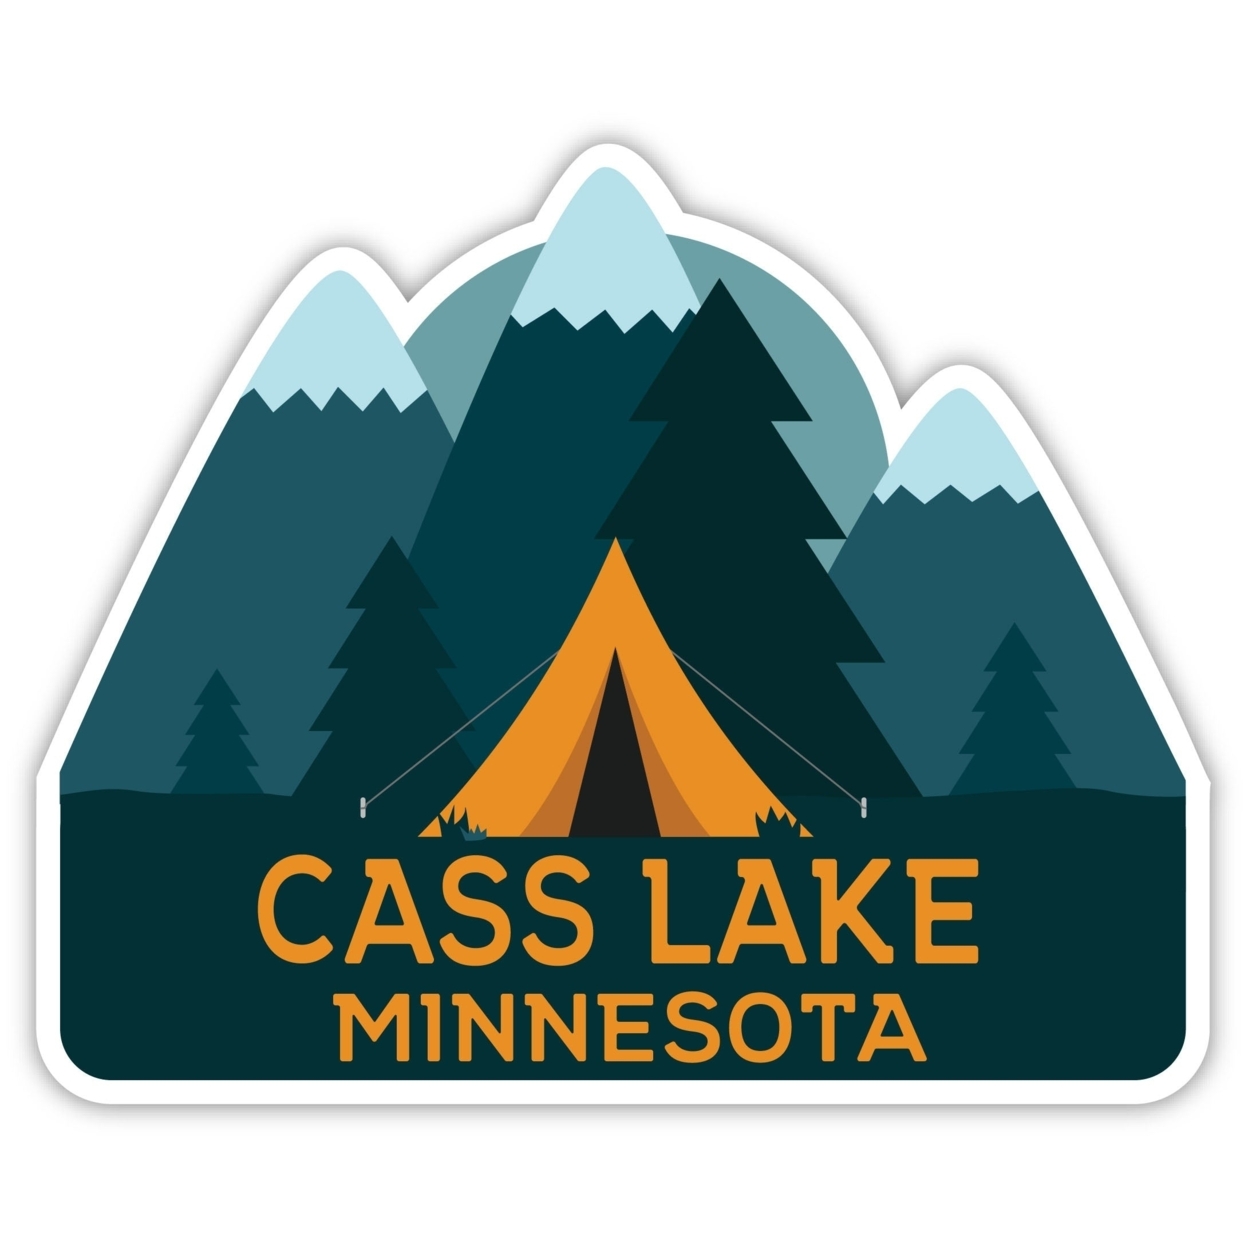 Cass Lake Minnesota Souvenir Decorative Stickers (Choose Theme And Size) - 4-Pack, 2-Inch, Tent